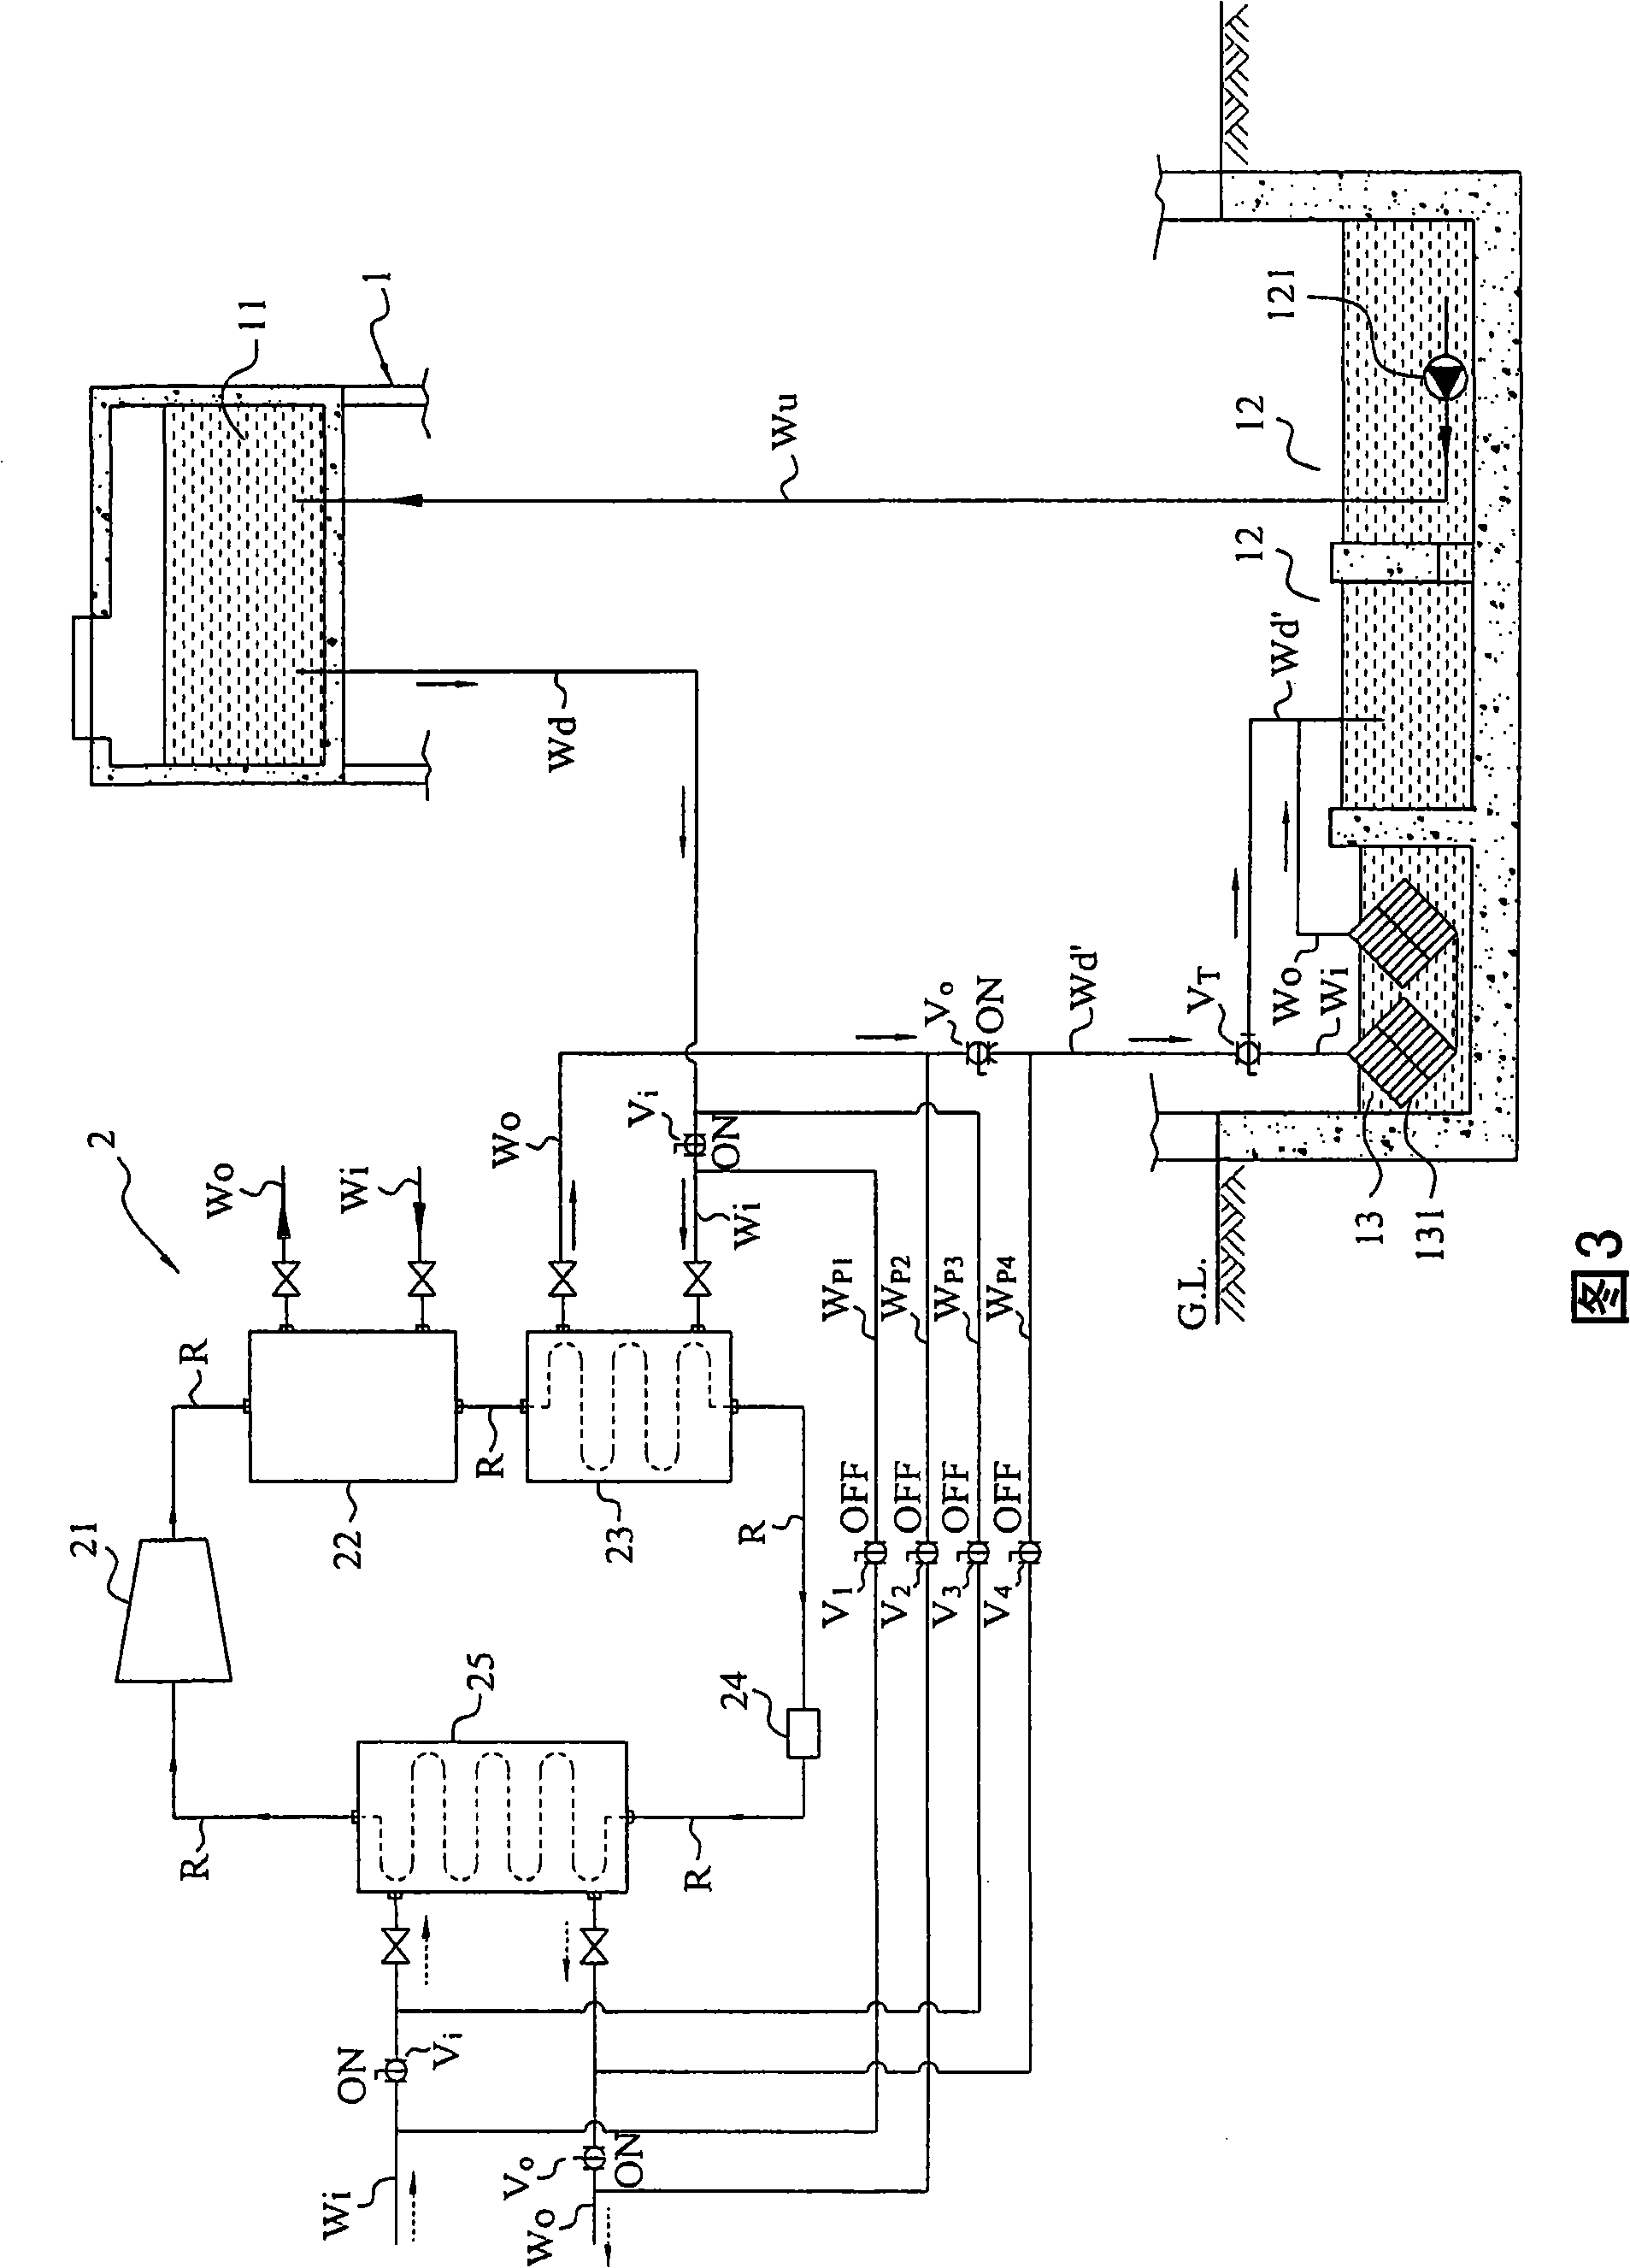 Radiation and/or energy accumulation method, heat exchange system and heat pump system